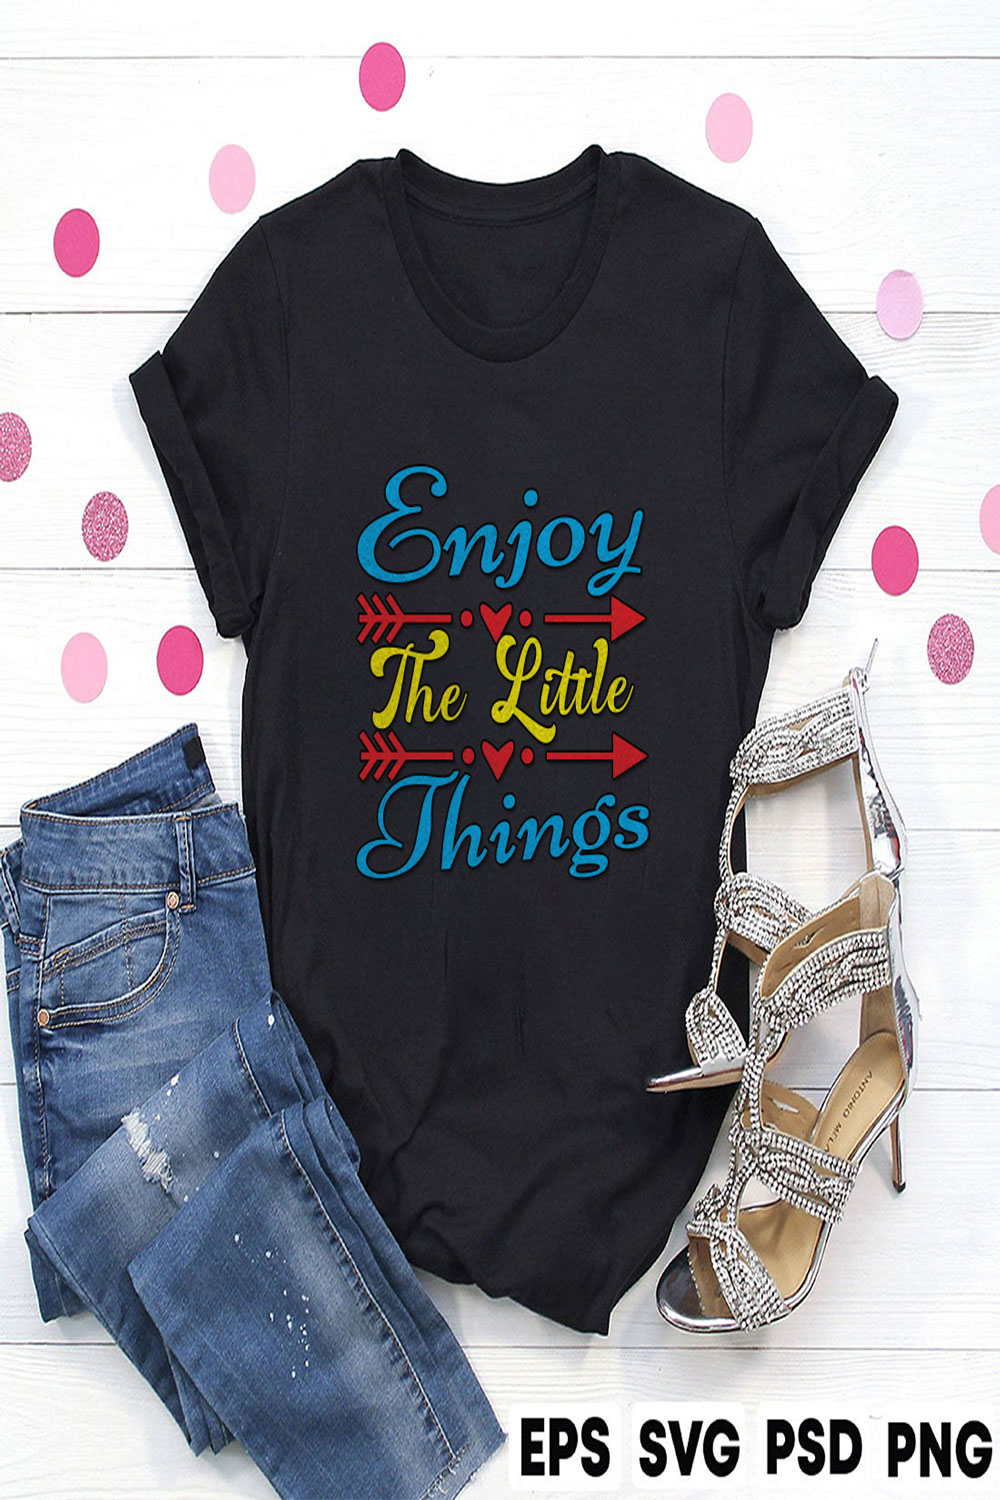 Enjoy the litter things pinterest preview image.